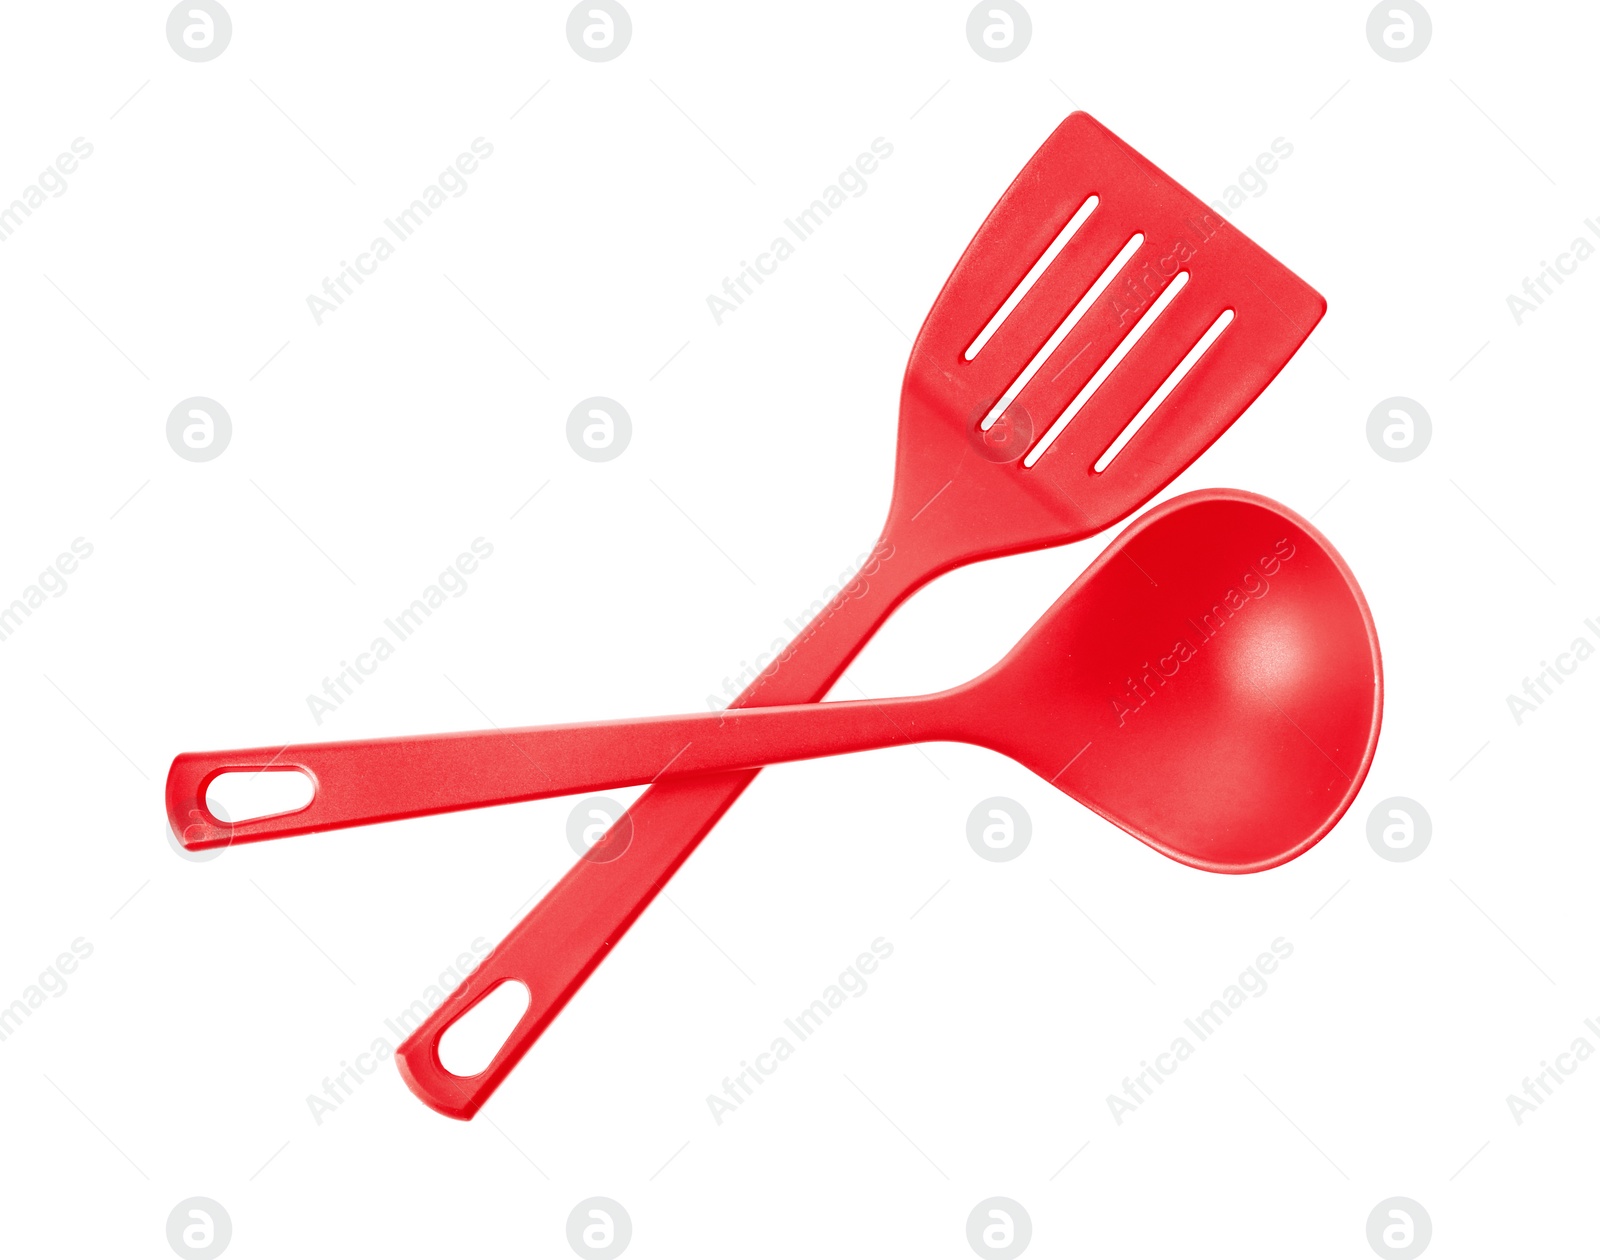 Photo of Slotted spatula and soup ladle on white background